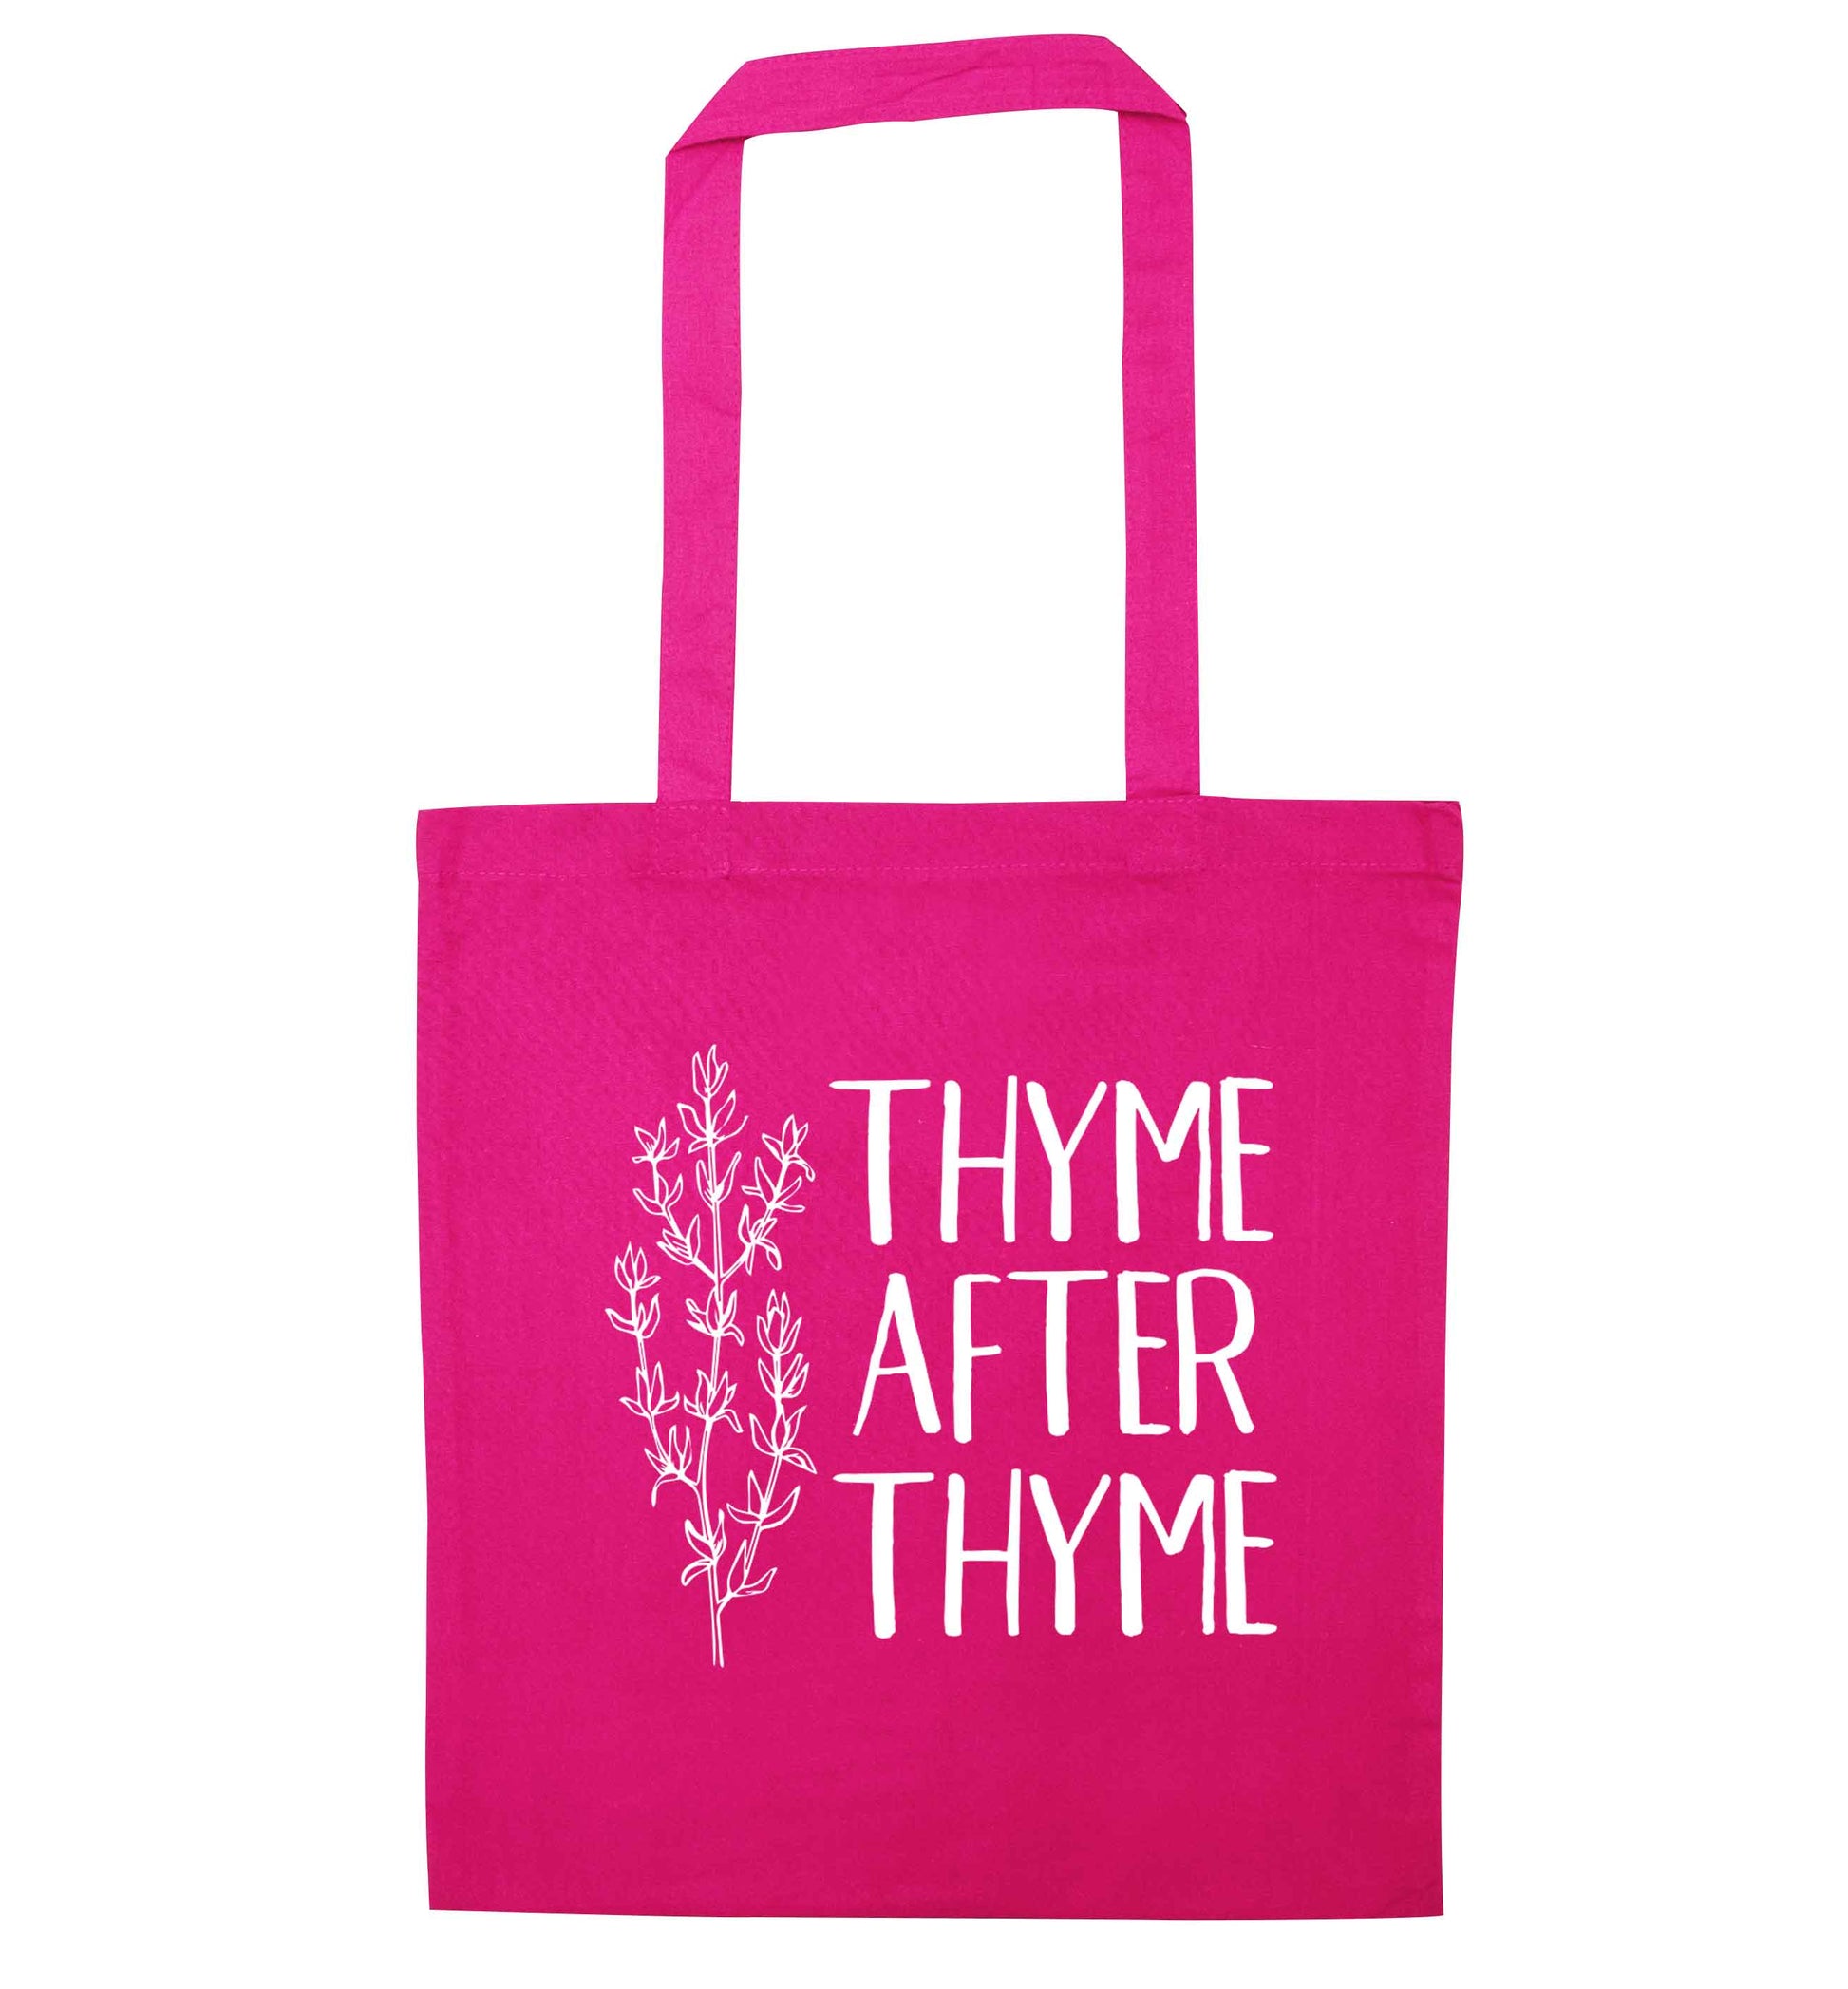 Thyme after thyme pink tote bag